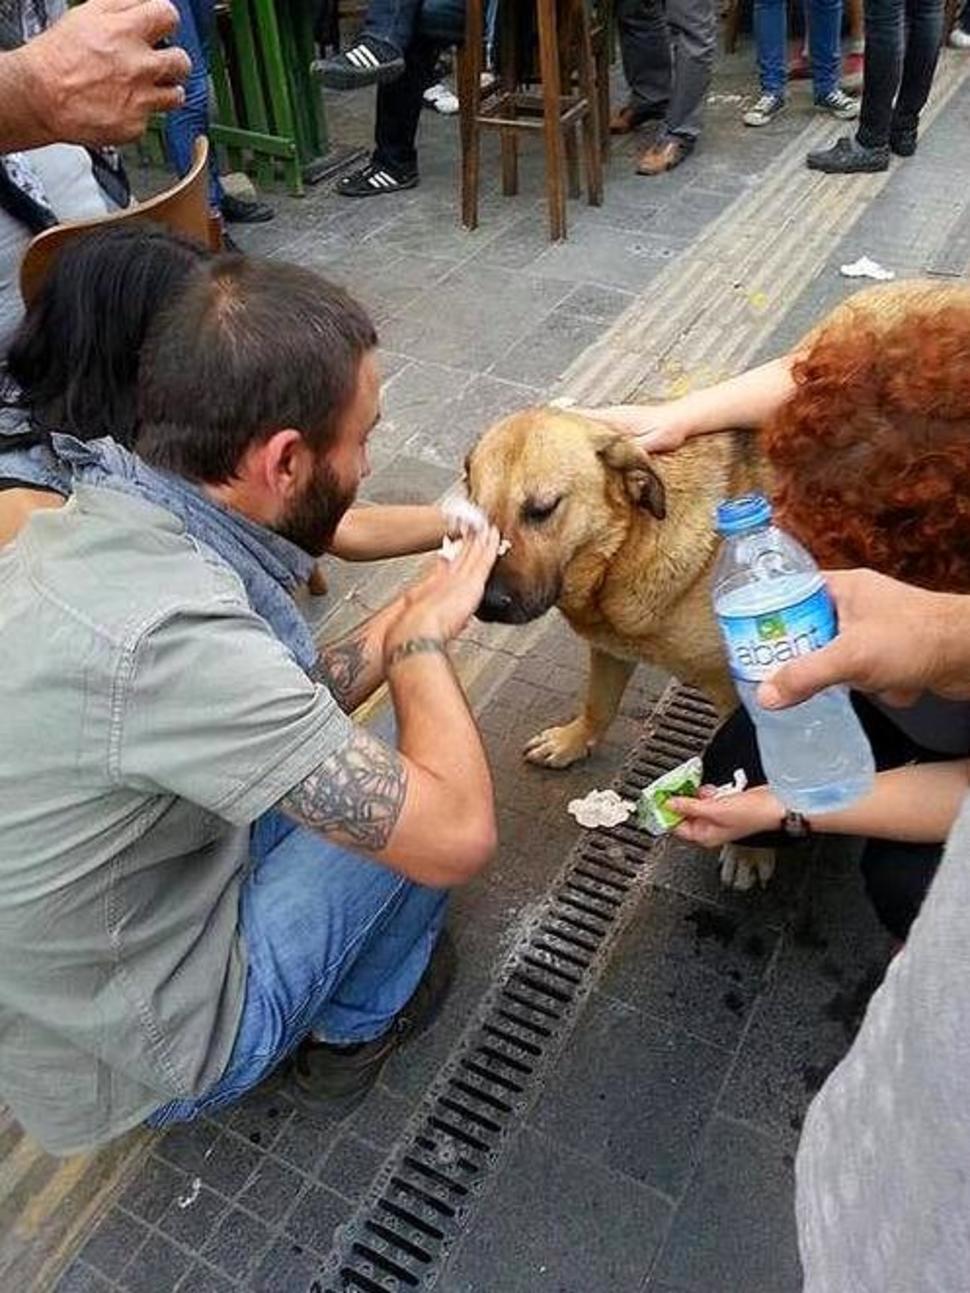 17. Protesters help a tear gassed dog